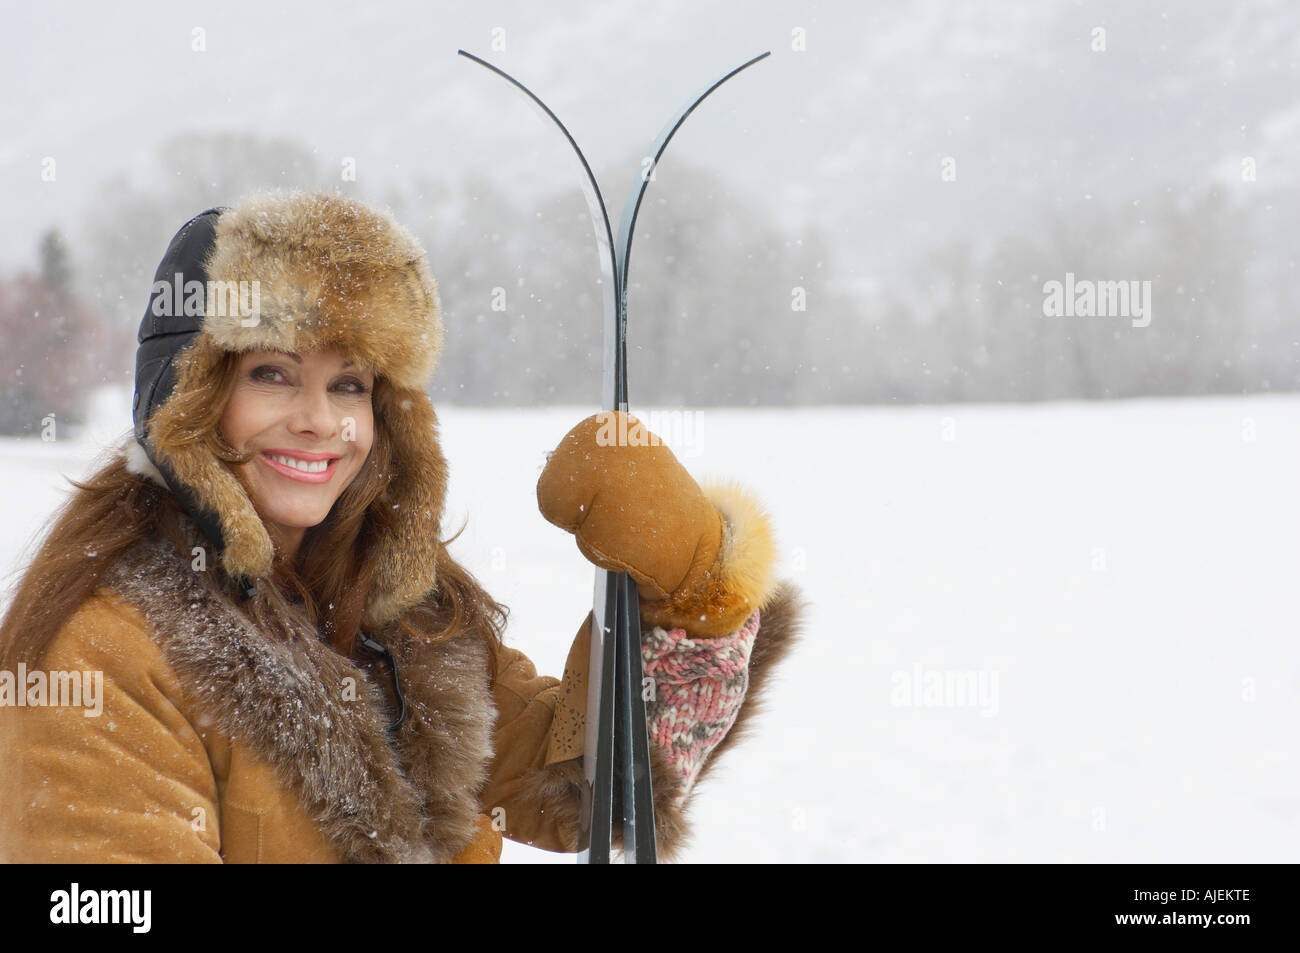 Woman wearing fur coat and hat, holding skis, in snow covered field, portrait. Stock Photo